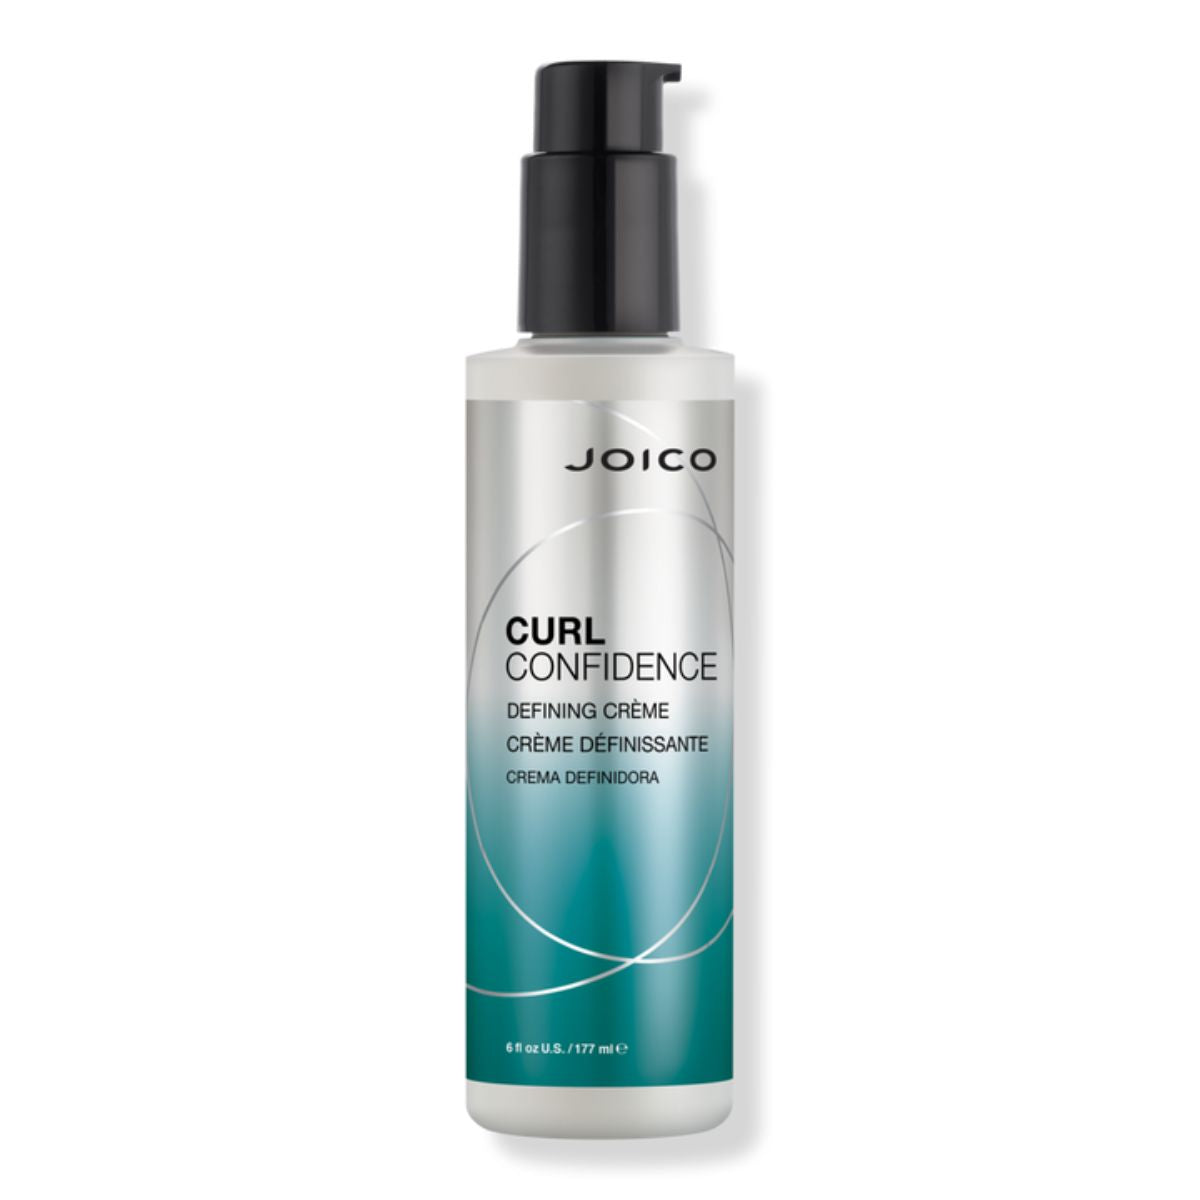 Joico Curl Confidence Defining Creme at Millies